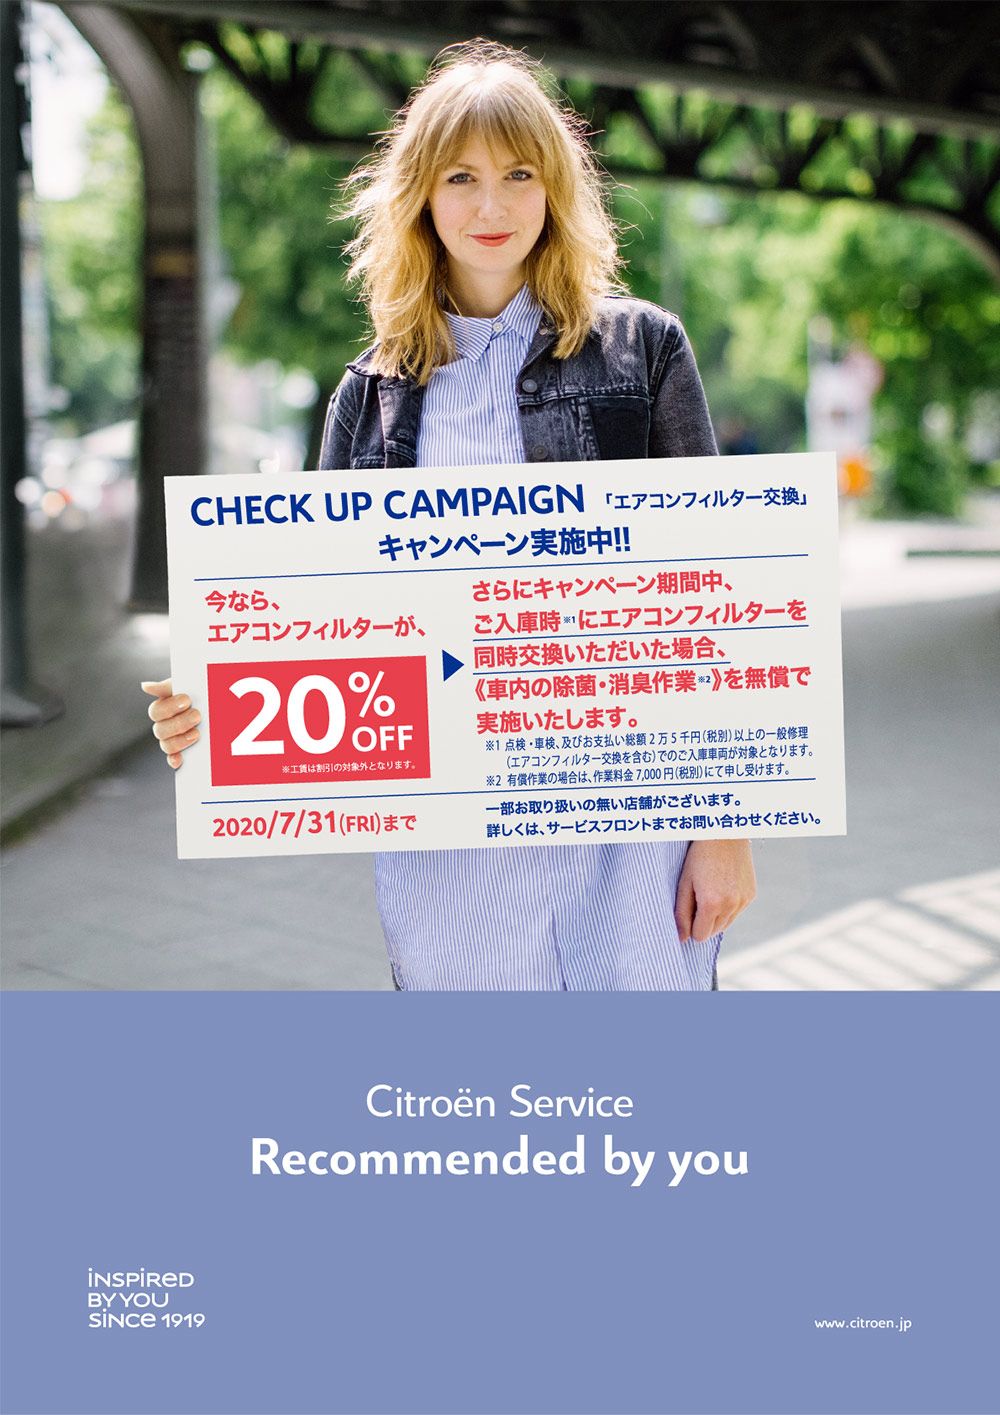 CHECK UP CAMPAIGN 7/31までです！！